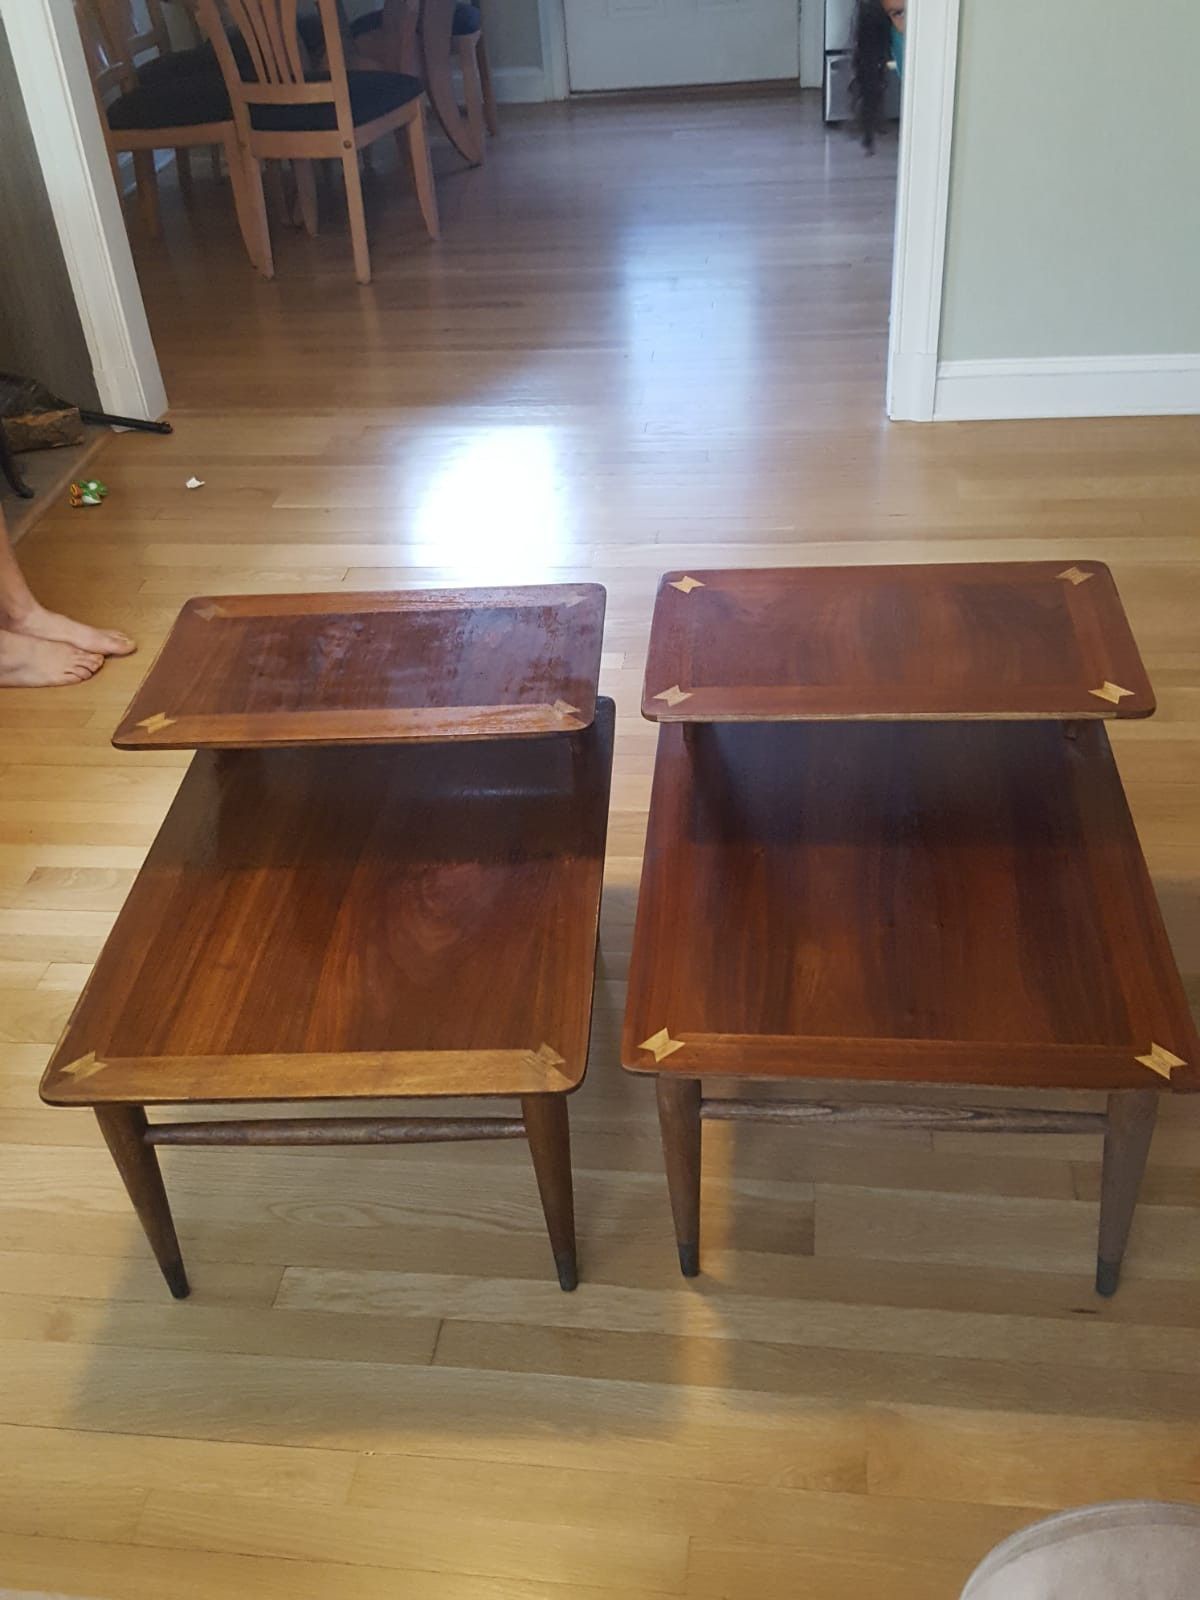 2 Antique coffee table